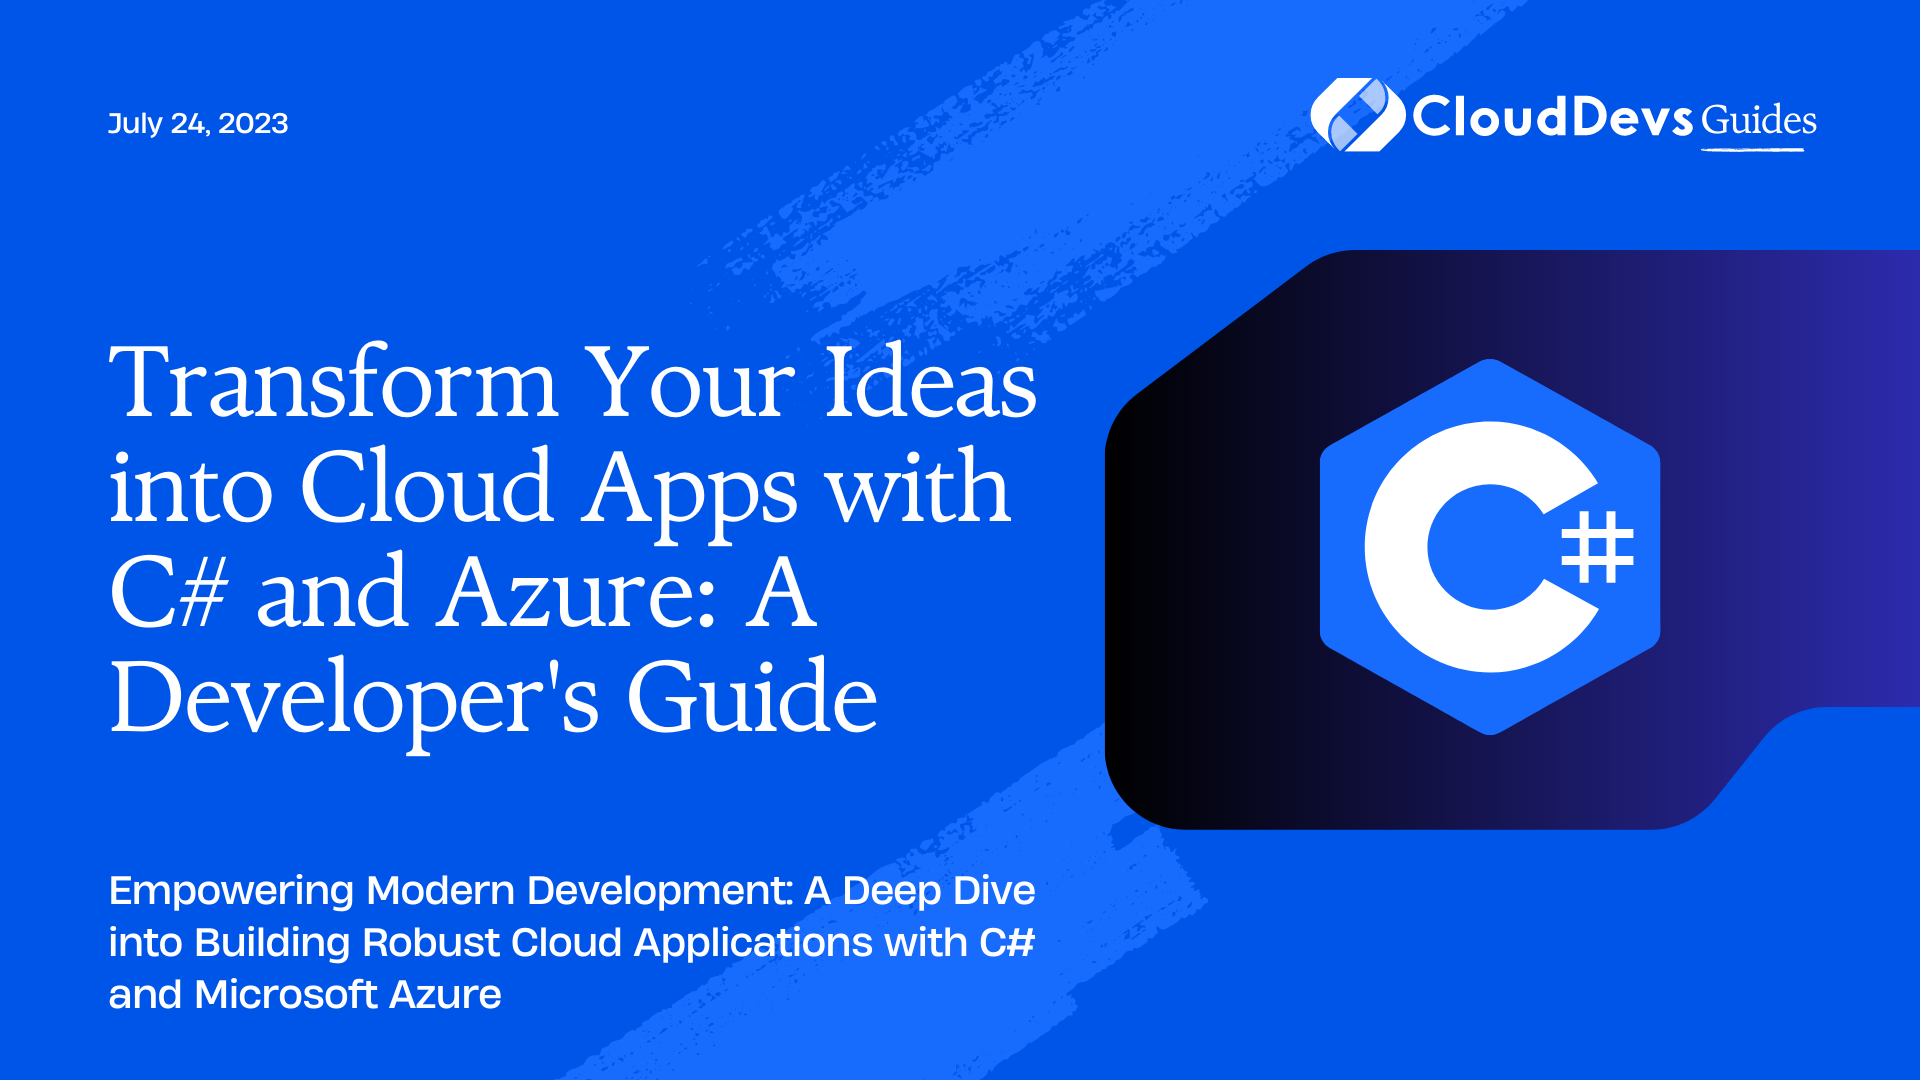 Transform Your Ideas into Cloud Apps with C# and Azure: A Developer's Guide